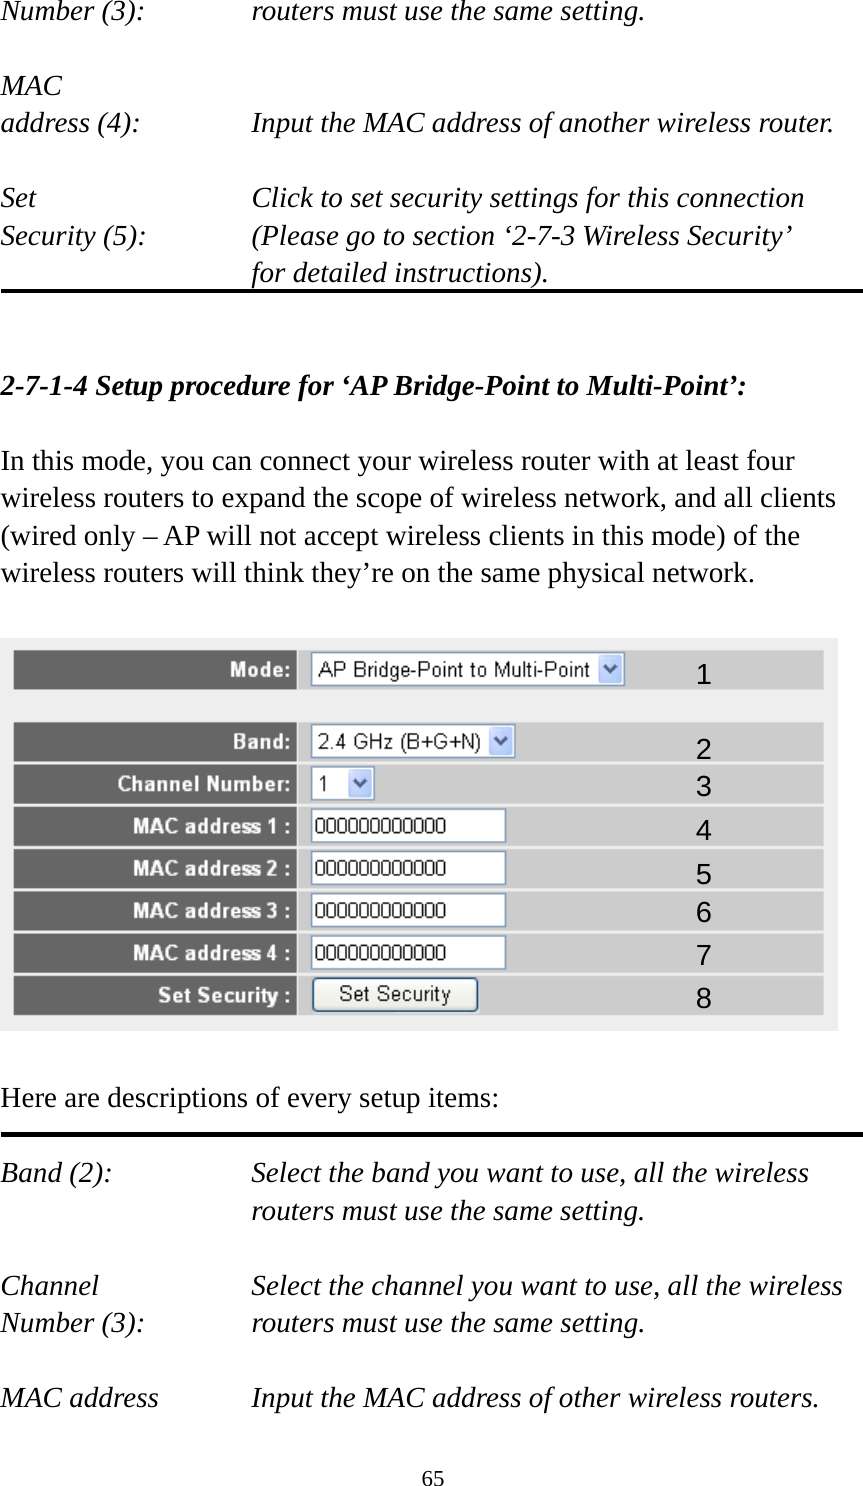 65 Number (3):  routers must use the same setting.  MAC address (4):  Input the MAC address of another wireless router.  Set    Click to set security settings for this connection Security (5):  (Please go to section ‘2-7-3 Wireless Security’   for detailed instructions).   2-7-1-4 Setup procedure for ‘AP Bridge-Point to Multi-Point’:  In this mode, you can connect your wireless router with at least four wireless routers to expand the scope of wireless network, and all clients (wired only – AP will not accept wireless clients in this mode) of the wireless routers will think they’re on the same physical network.    Here are descriptions of every setup items:  Band (2):  Select the band you want to use, all the wireless routers must use the same setting.  Channel  Select the channel you want to use, all the wireless Number (3):  routers must use the same setting.  MAC address    Input the MAC address of other wireless routers. 1 2 3 4 5 6 7 8 